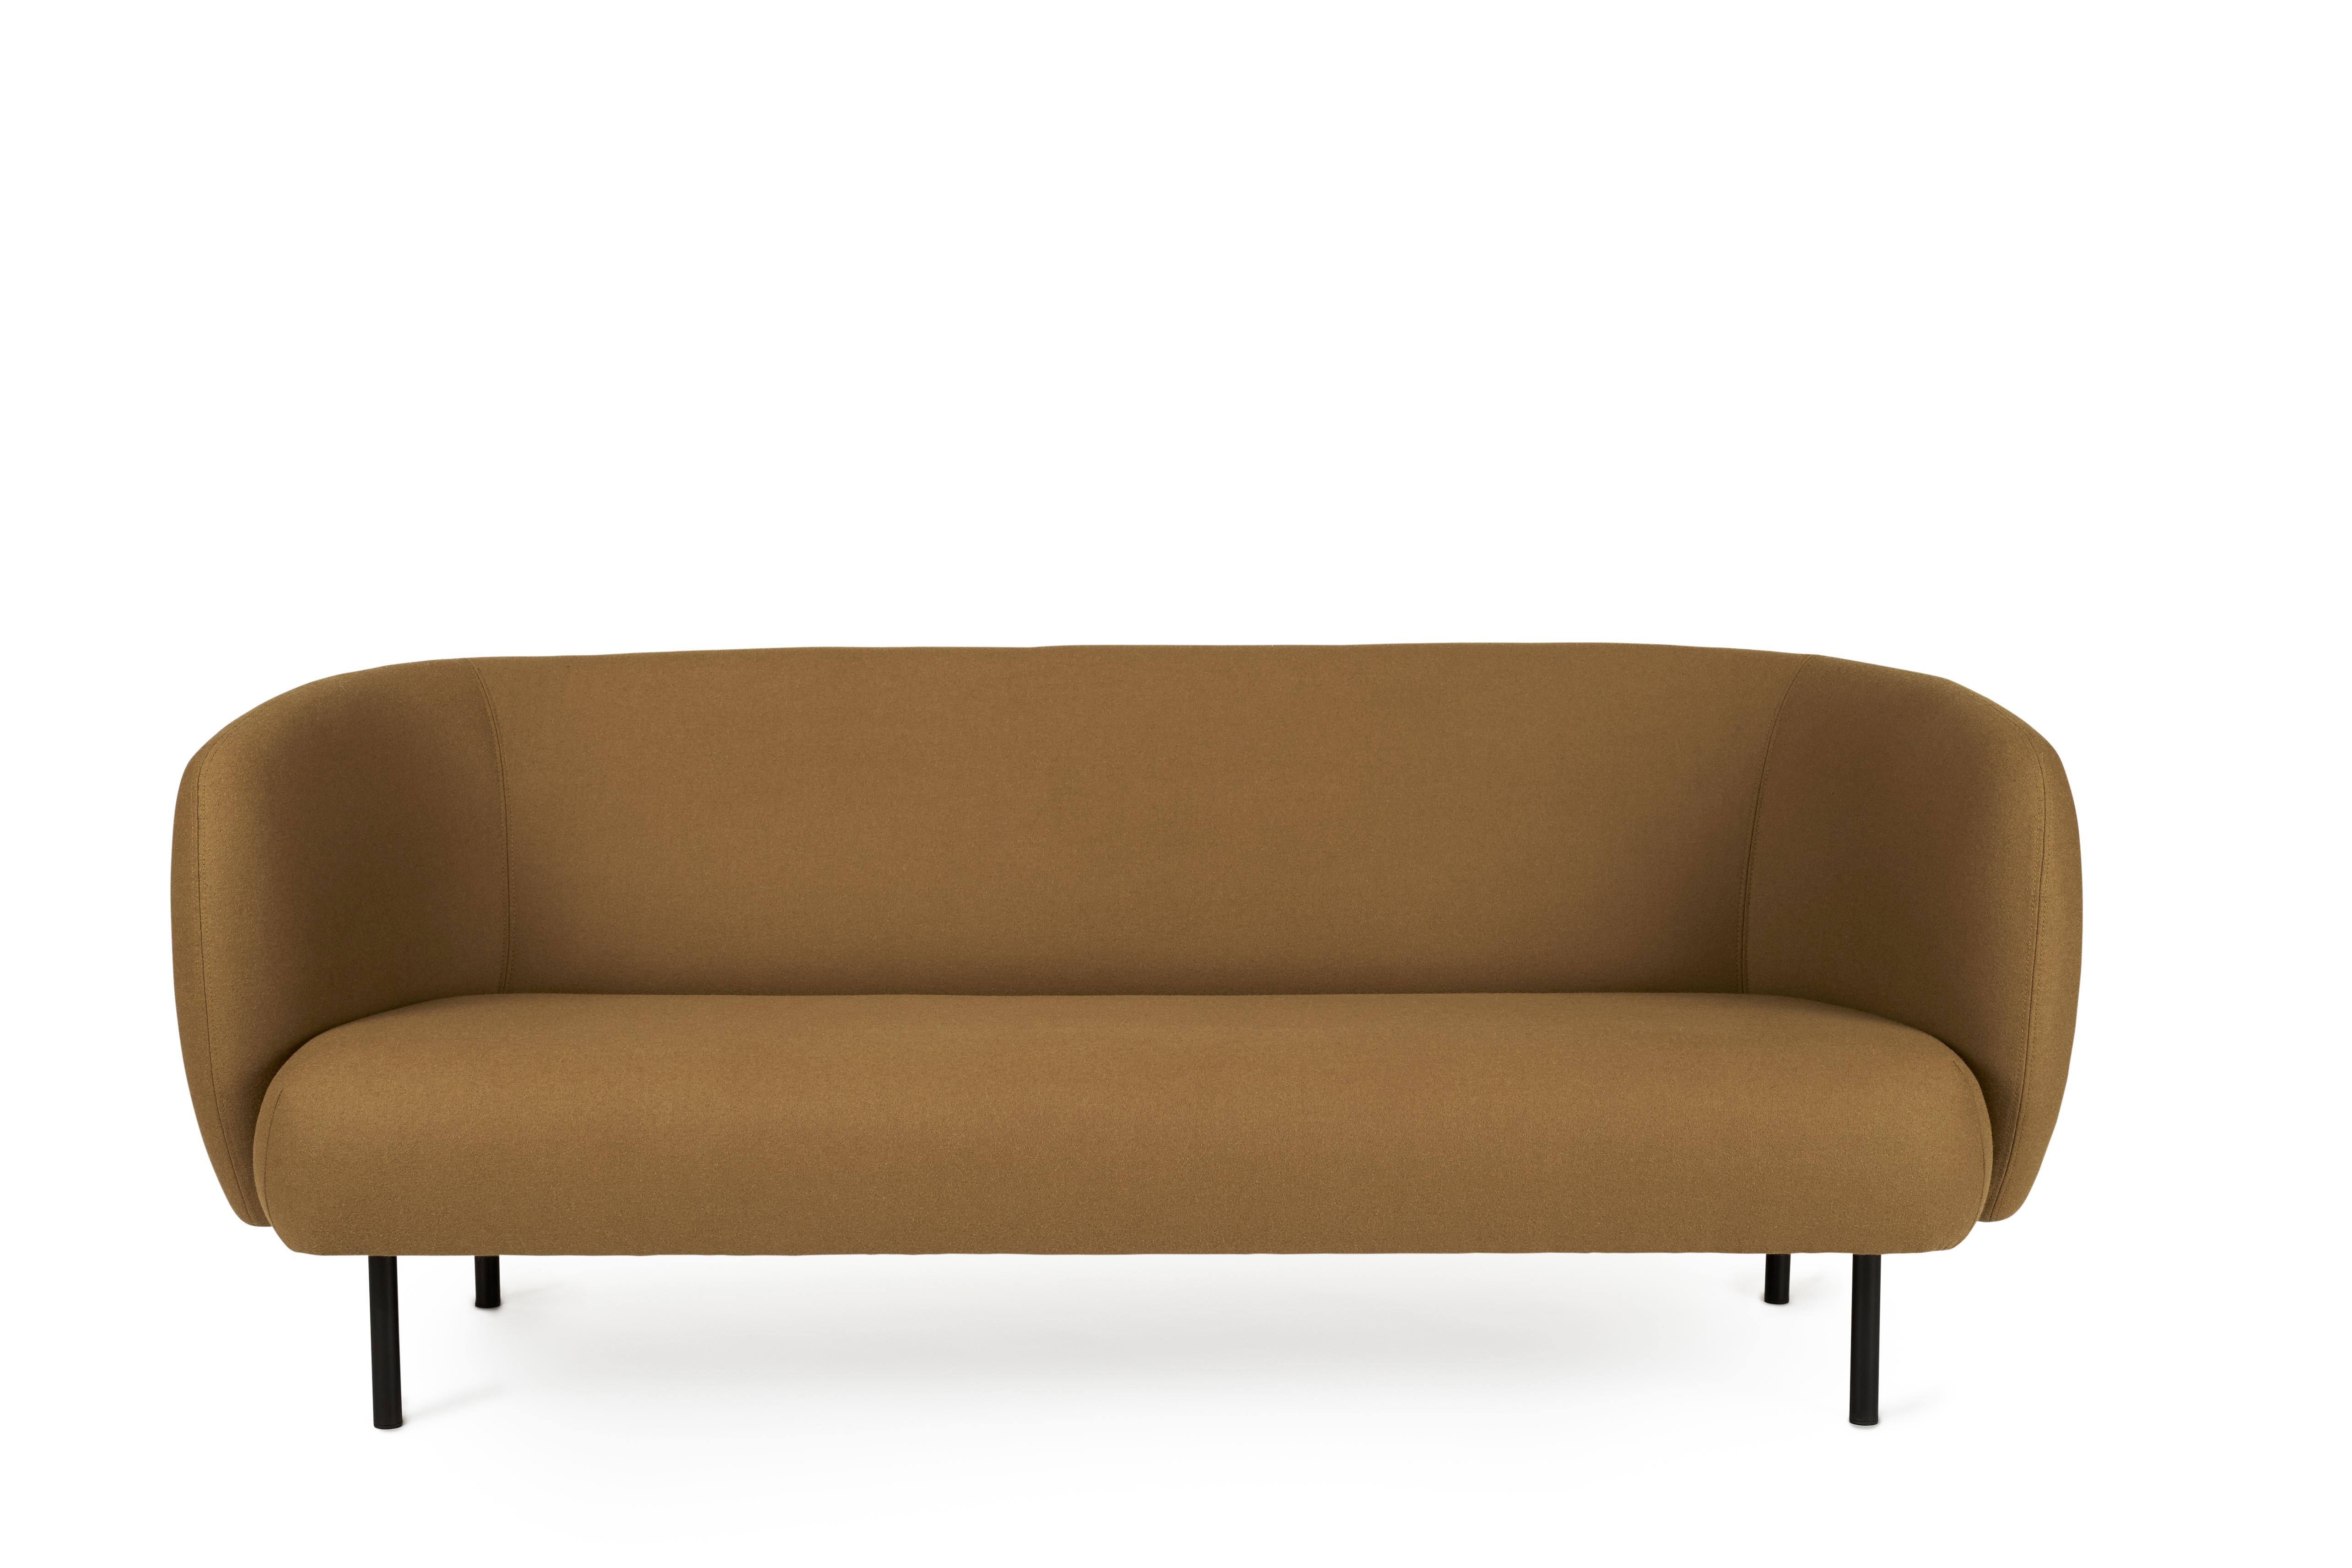 Customizable Cape 3-Seat Sofa, by Charlotte Høncke from Warm Nordic For ...